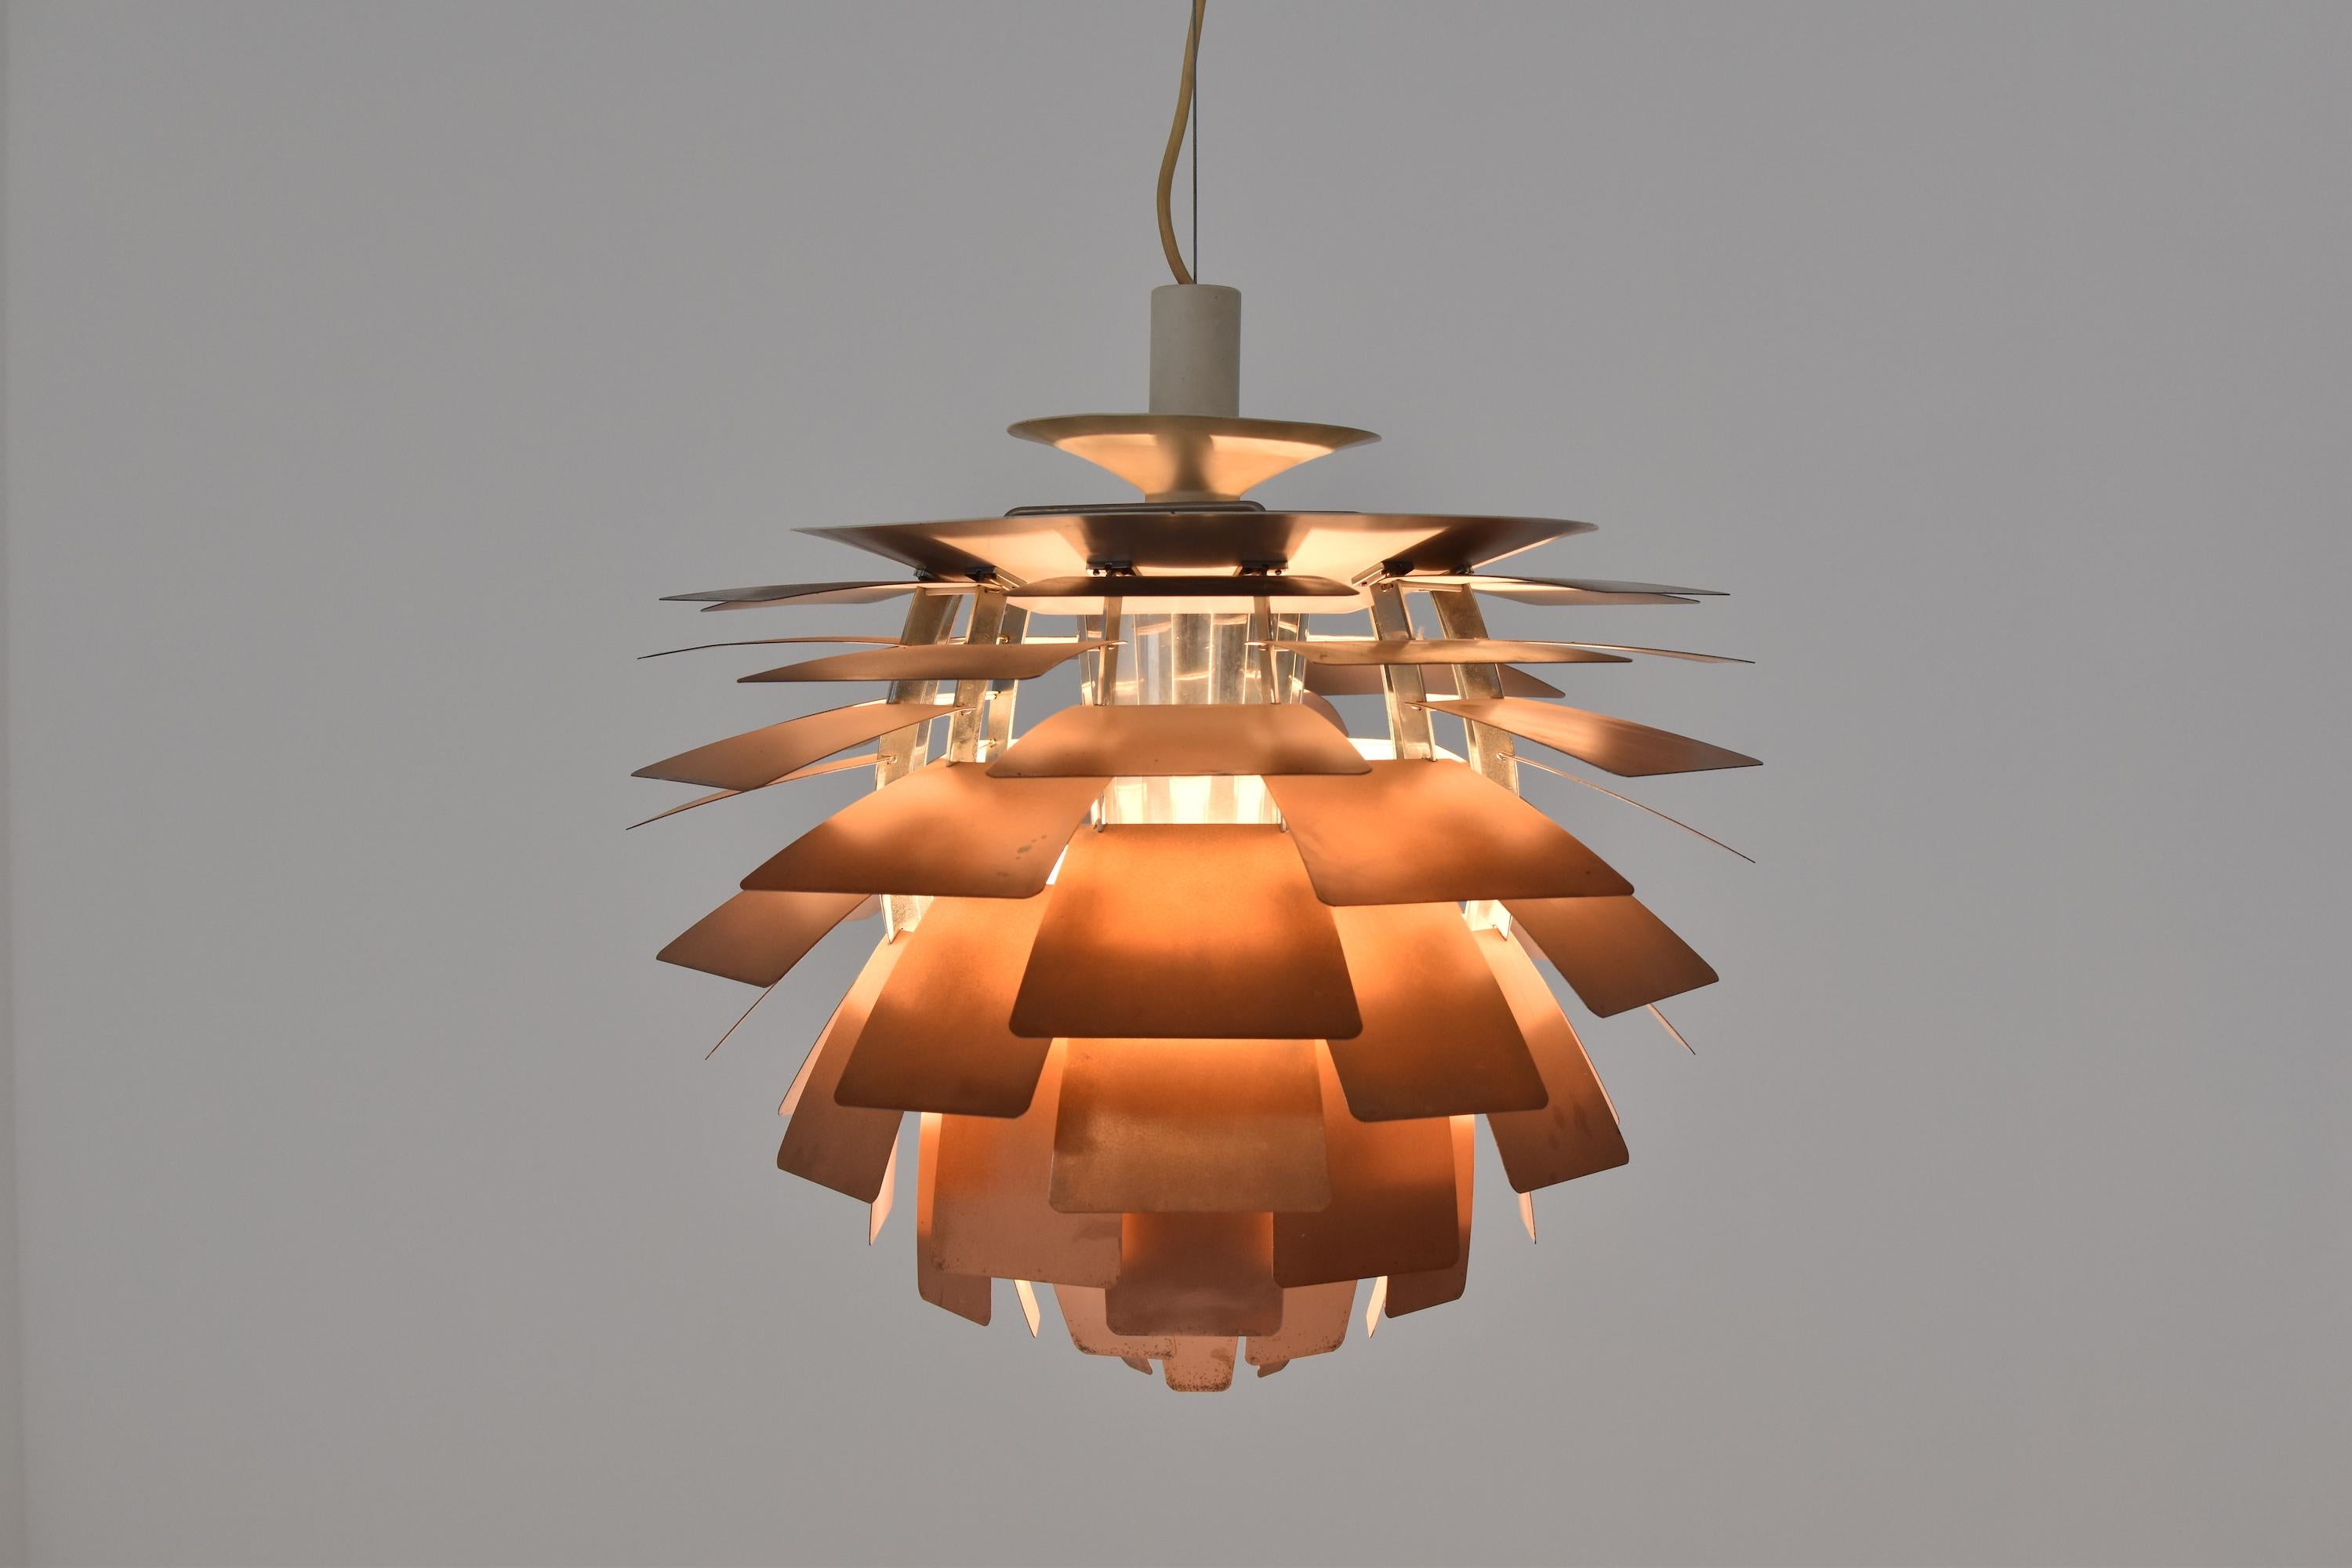 First edition PH Artichoke pendant by Poul Henningsen for Louis Poulsen, Denmark, 1950s. This iconic pendant is constructed from copper, enameled steel, chrome plated brass and enameled aluminium. It is designed in 1958 for Langelinie Pavillionen in